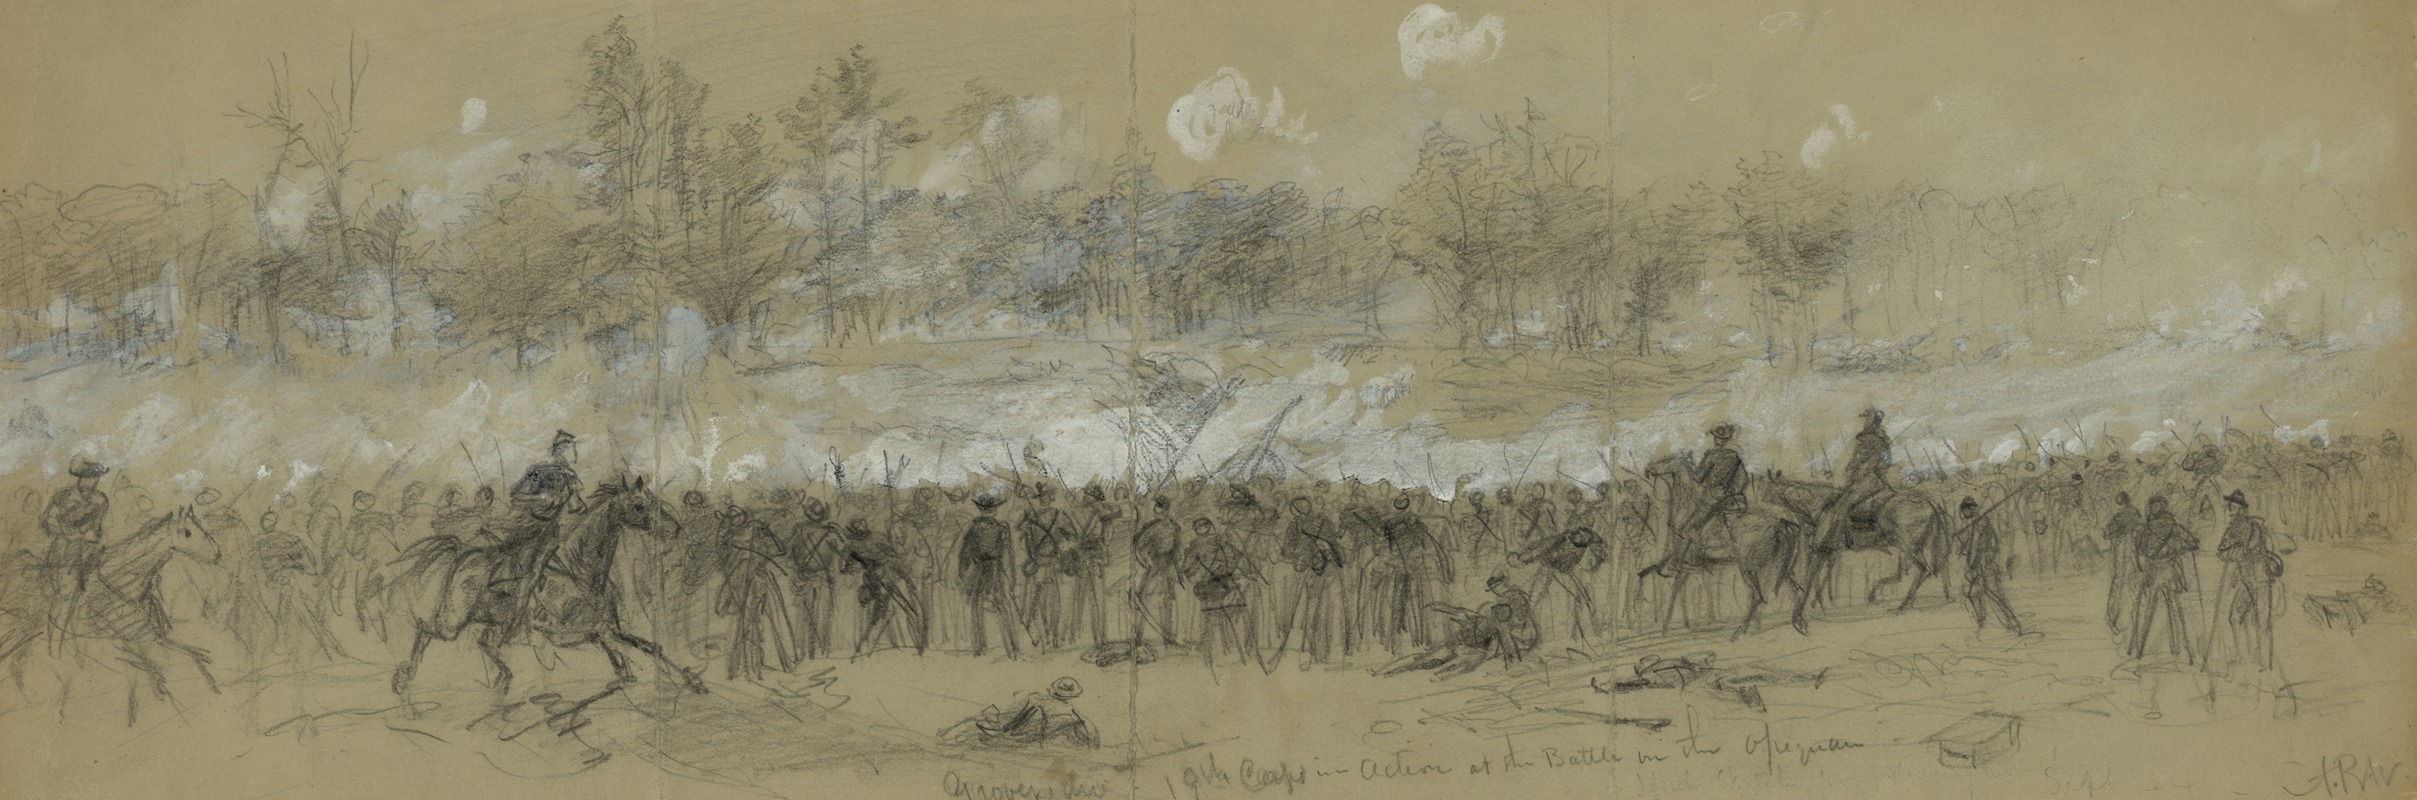 Alfred Rudolph Waud - Grovers div. 19th Corps in action at the Battle in the Opequon